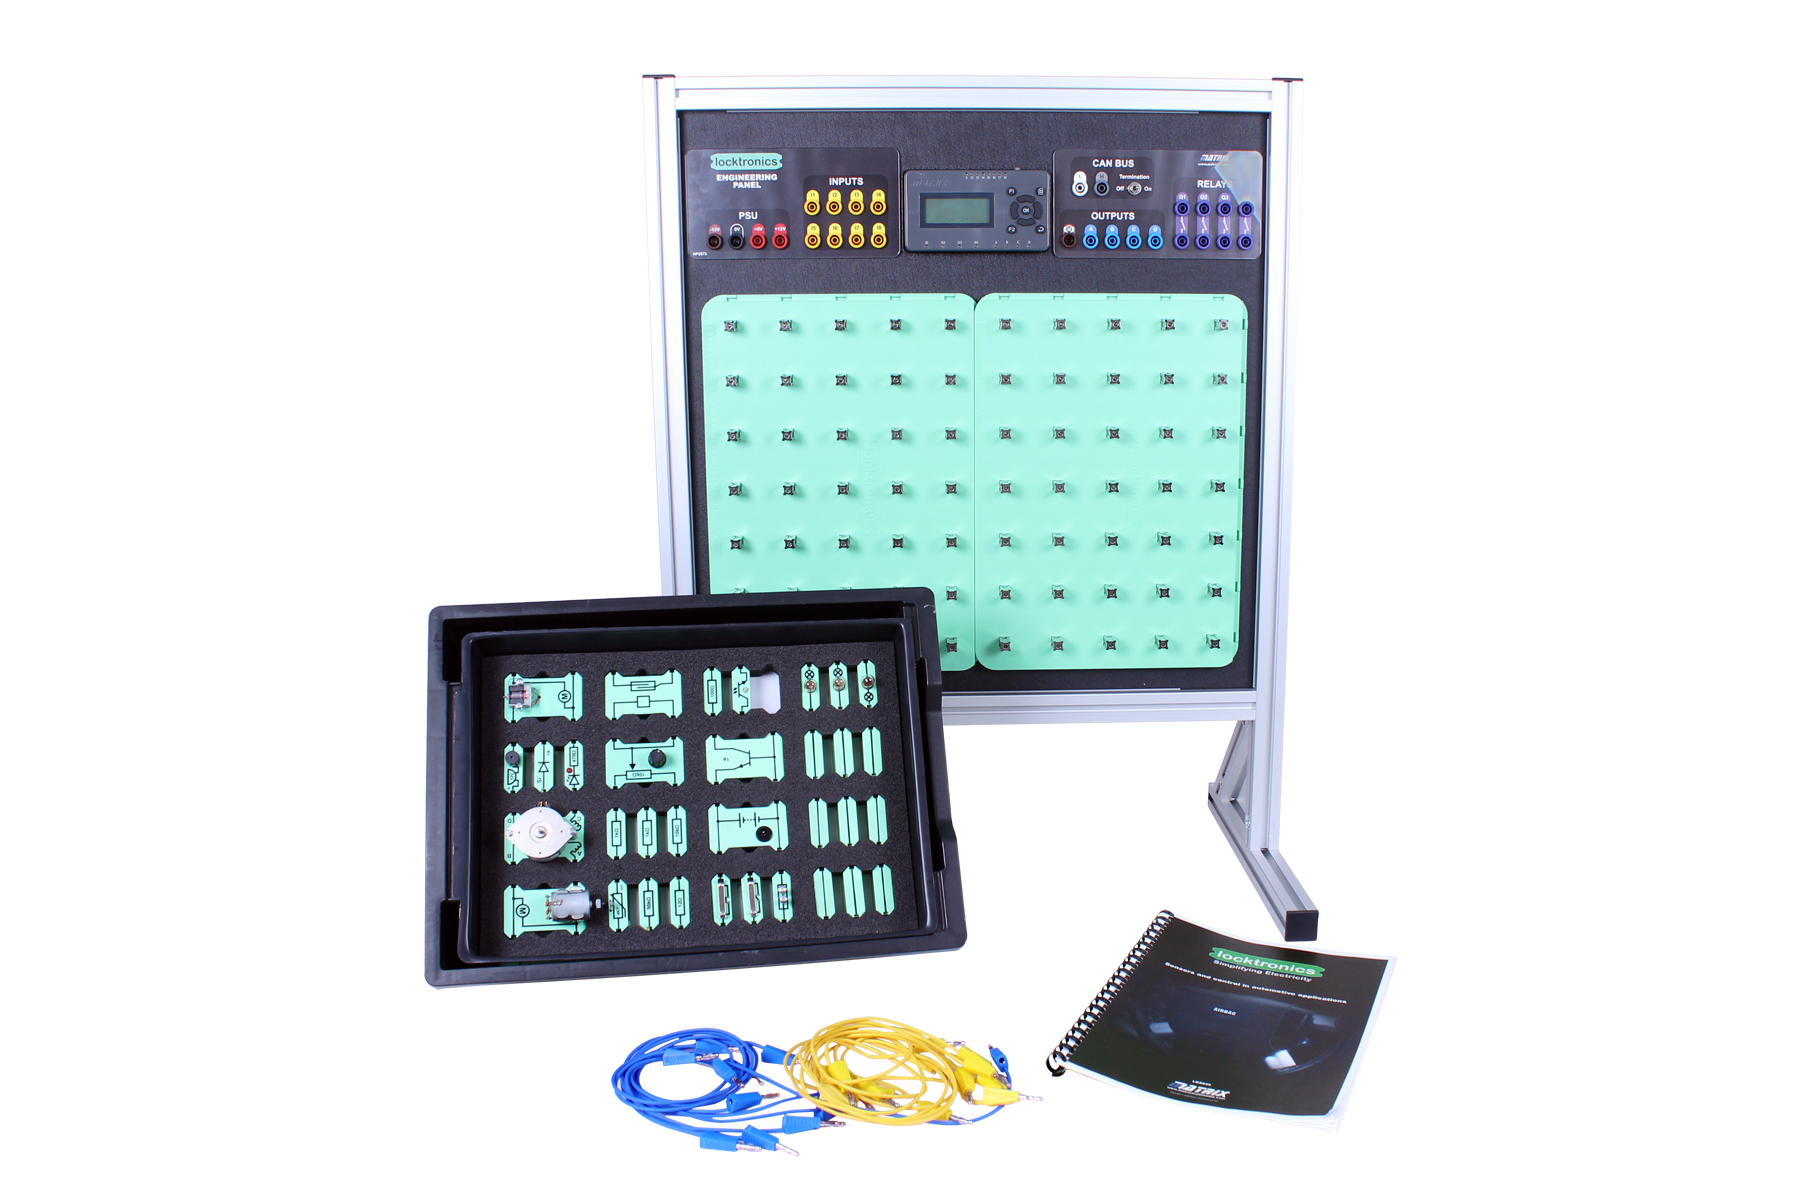 Picture of Industrial sensor, actuator and control applications on panel